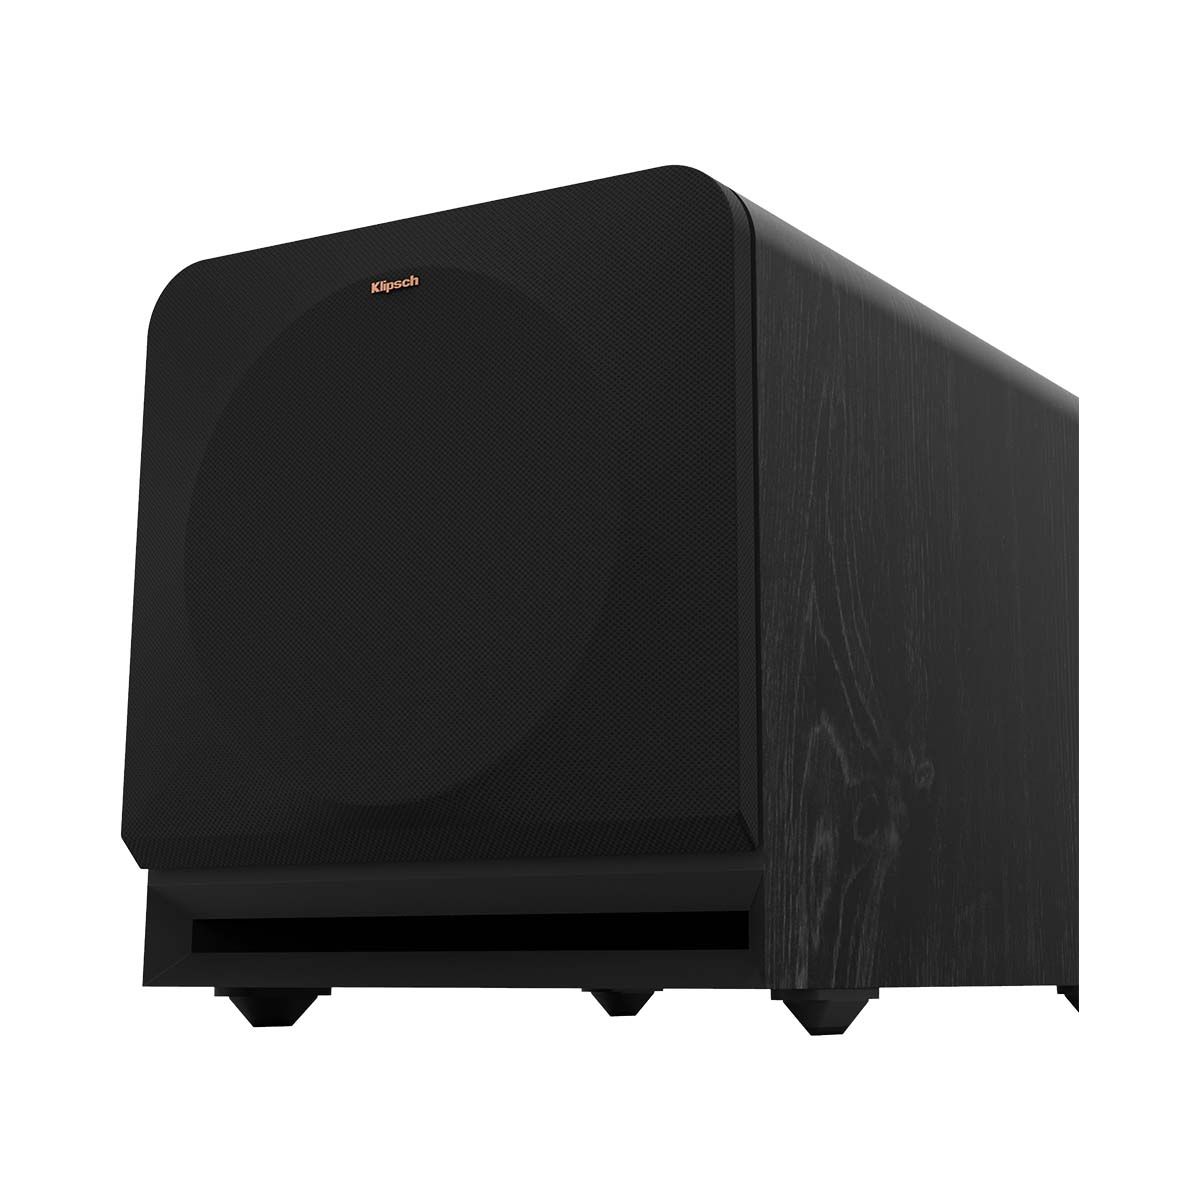 Klipsch RP-1000SW 10" Powered Subwoofer - Ebony - angled front right view with grille